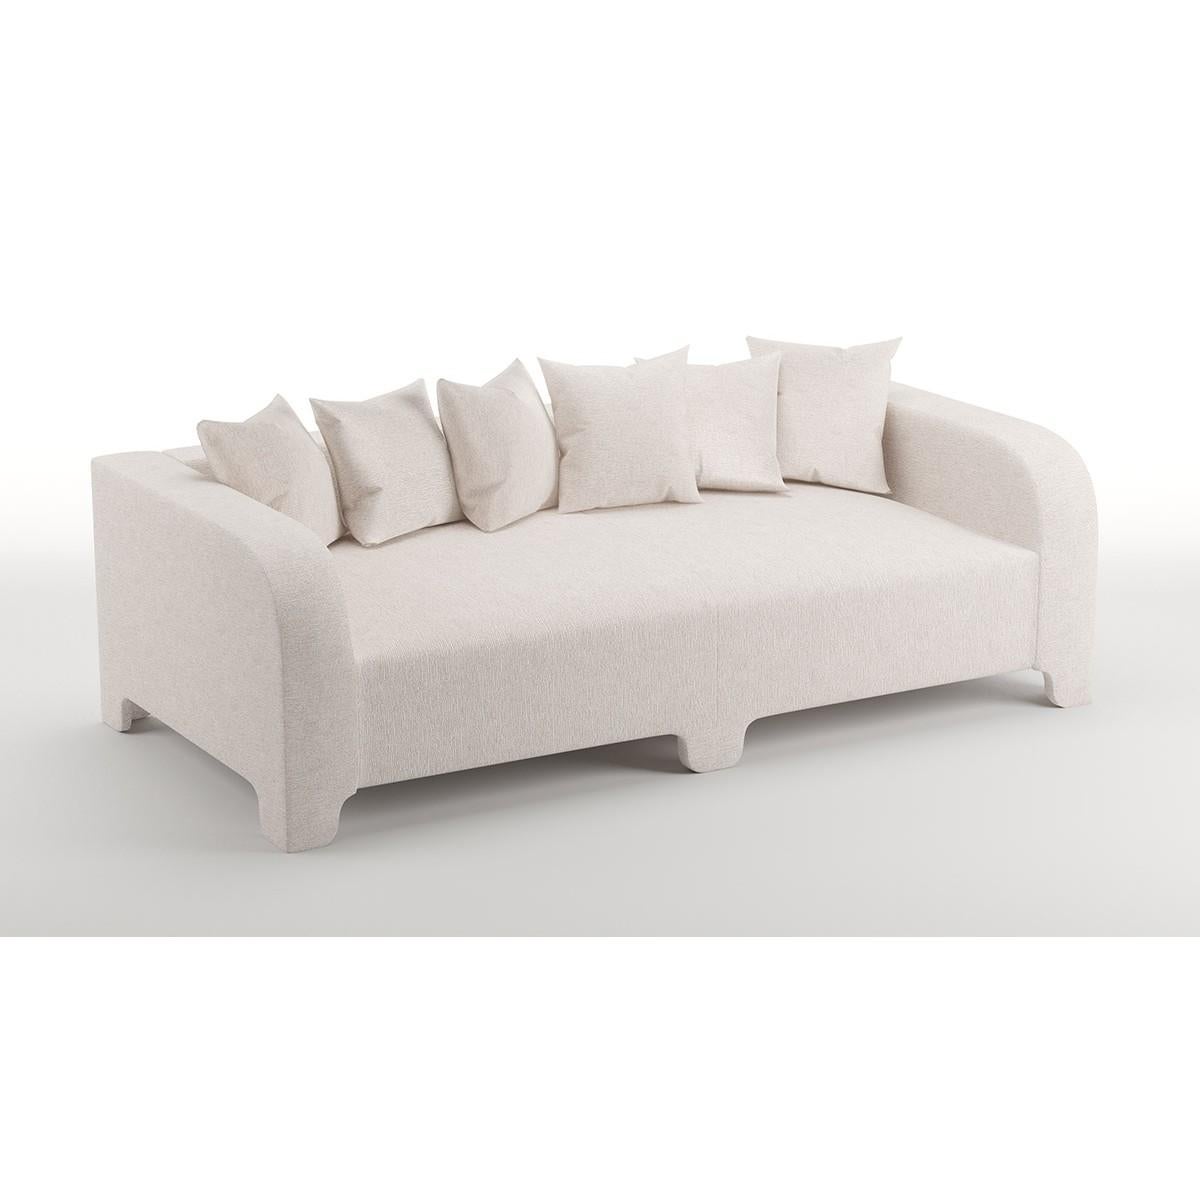 Popus Editions Graziella 2 Seater Sofa in Otter Megeve Fabric Knit Effect